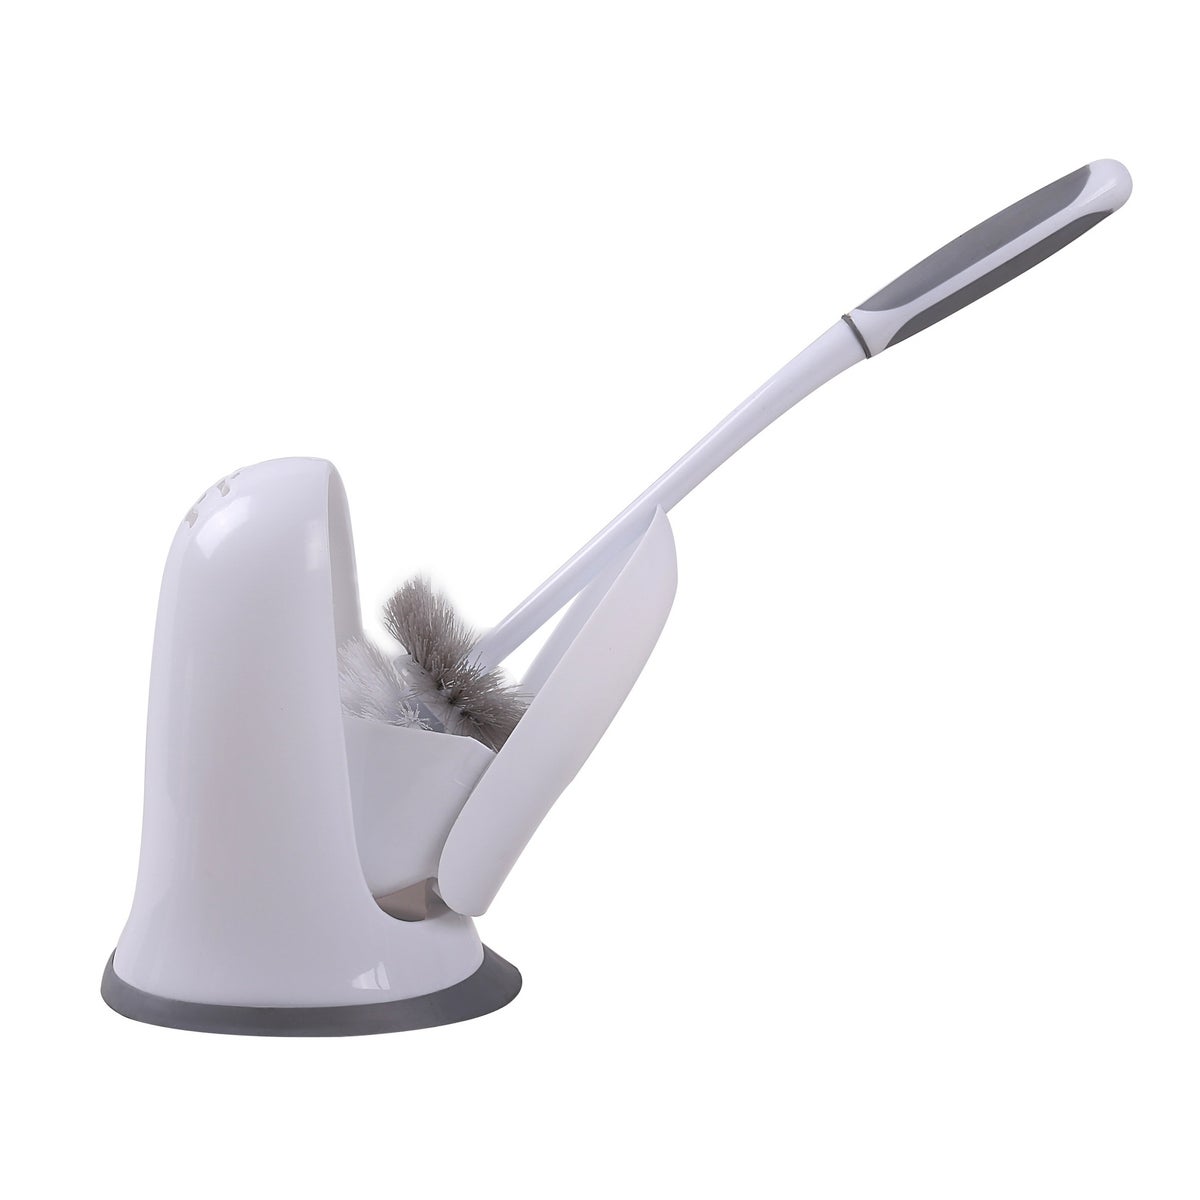 Toilet Bowl Brush with Hide-away Caddy (12)